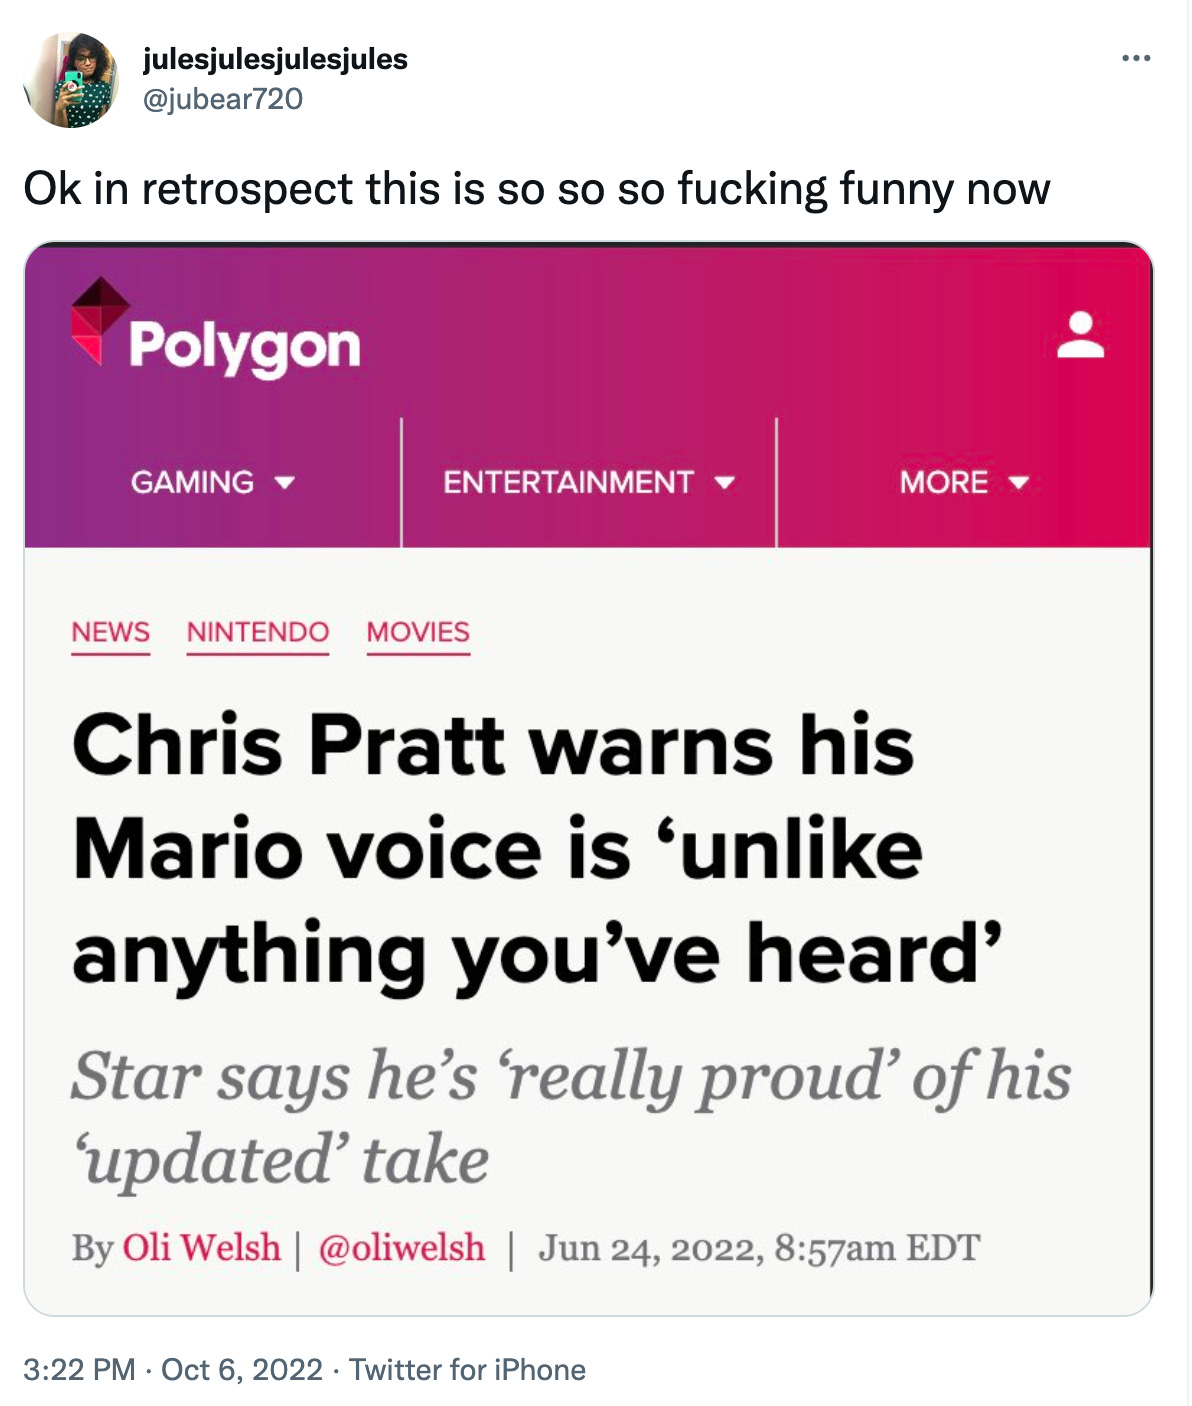 Tweet: “Ok in retrospect this is so so so fucking funny now” Attached screenshot: An article title on Polygon that says: “Chris Pratt warns his Mario voice is ‘unlike anything you’ve heard.’ Star says he’s ‘really proud’ of his ‘updated’ take.”